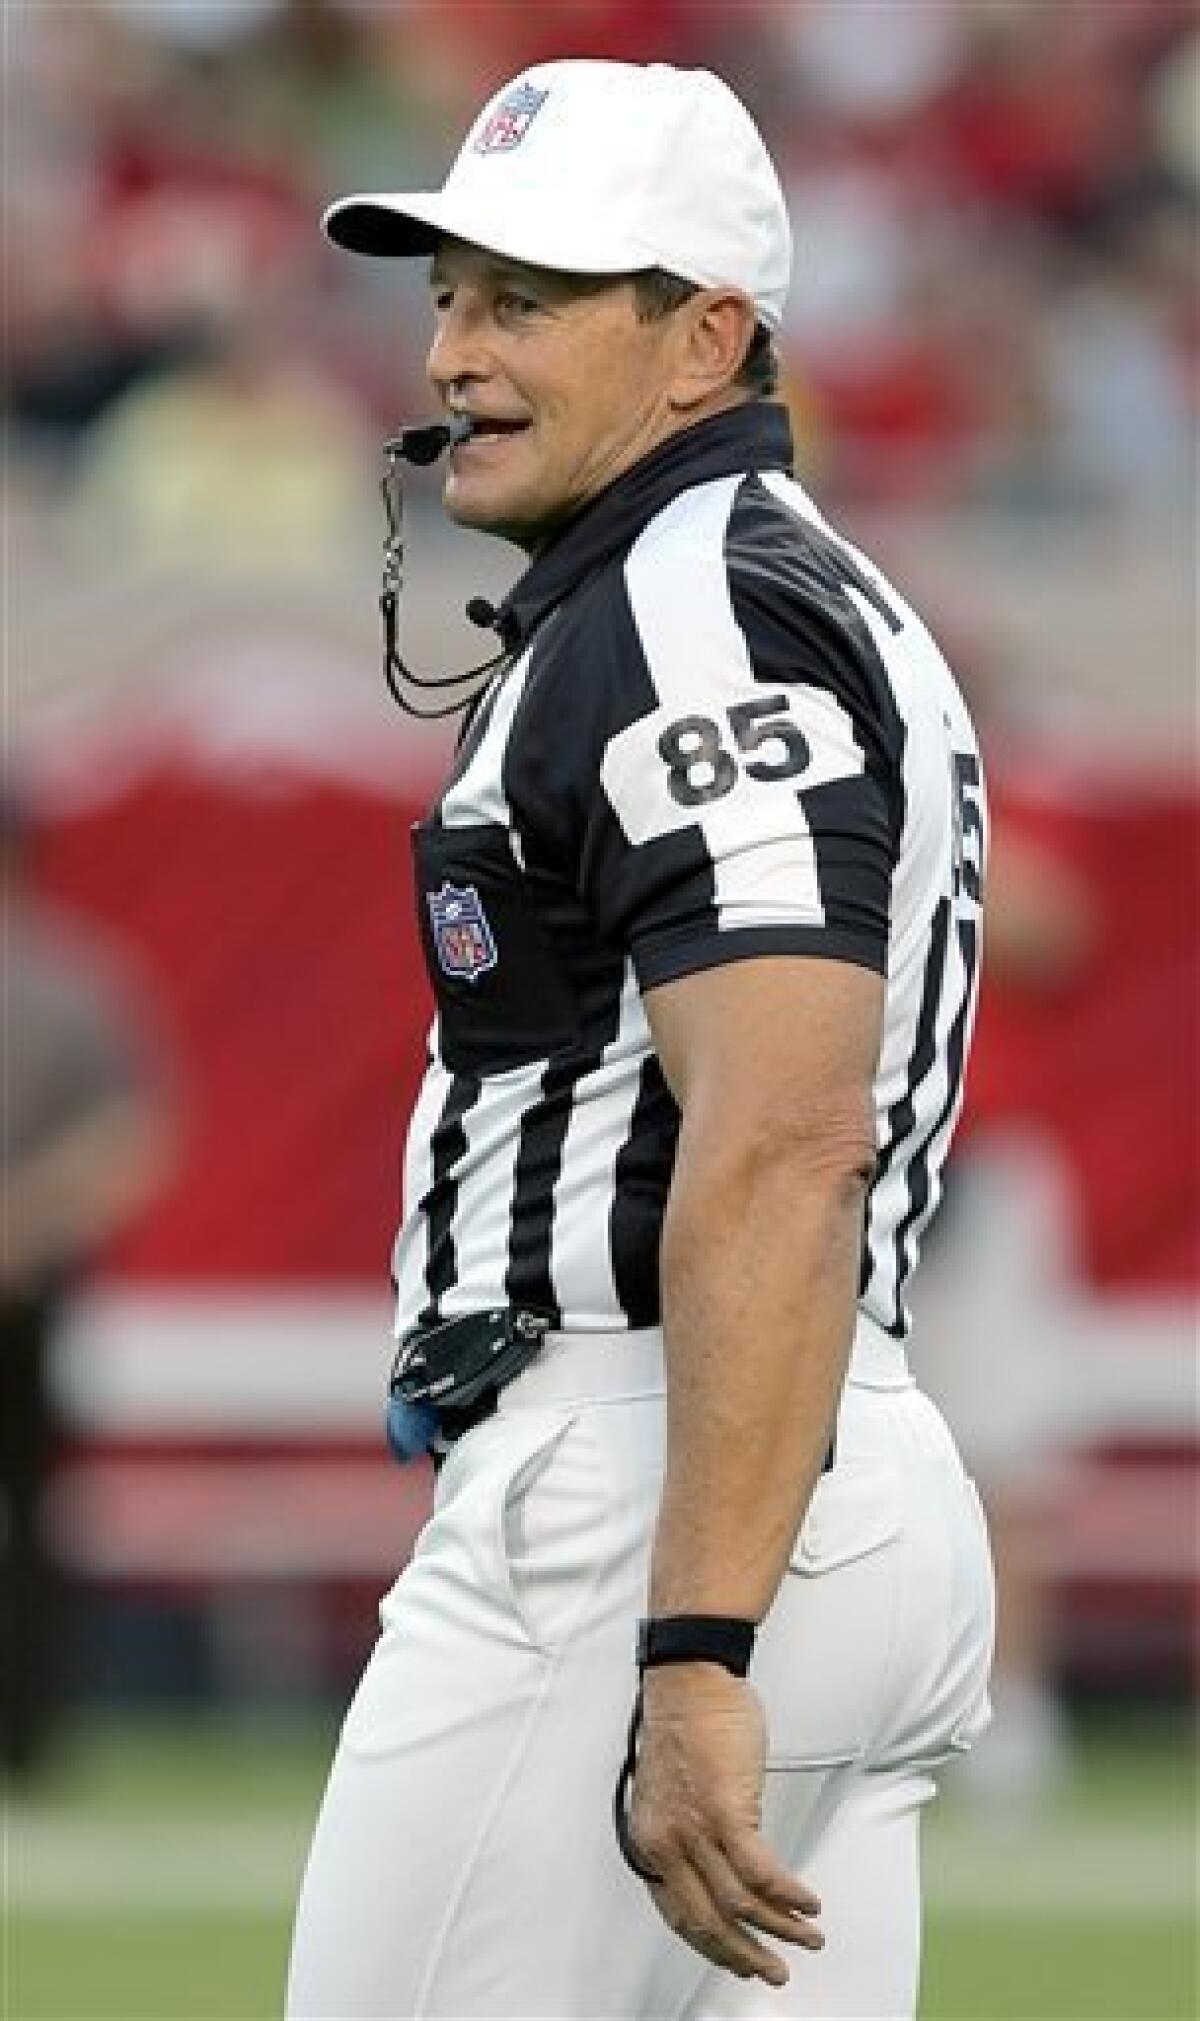 Referees support Ed Hochuli following botched call - The San Diego